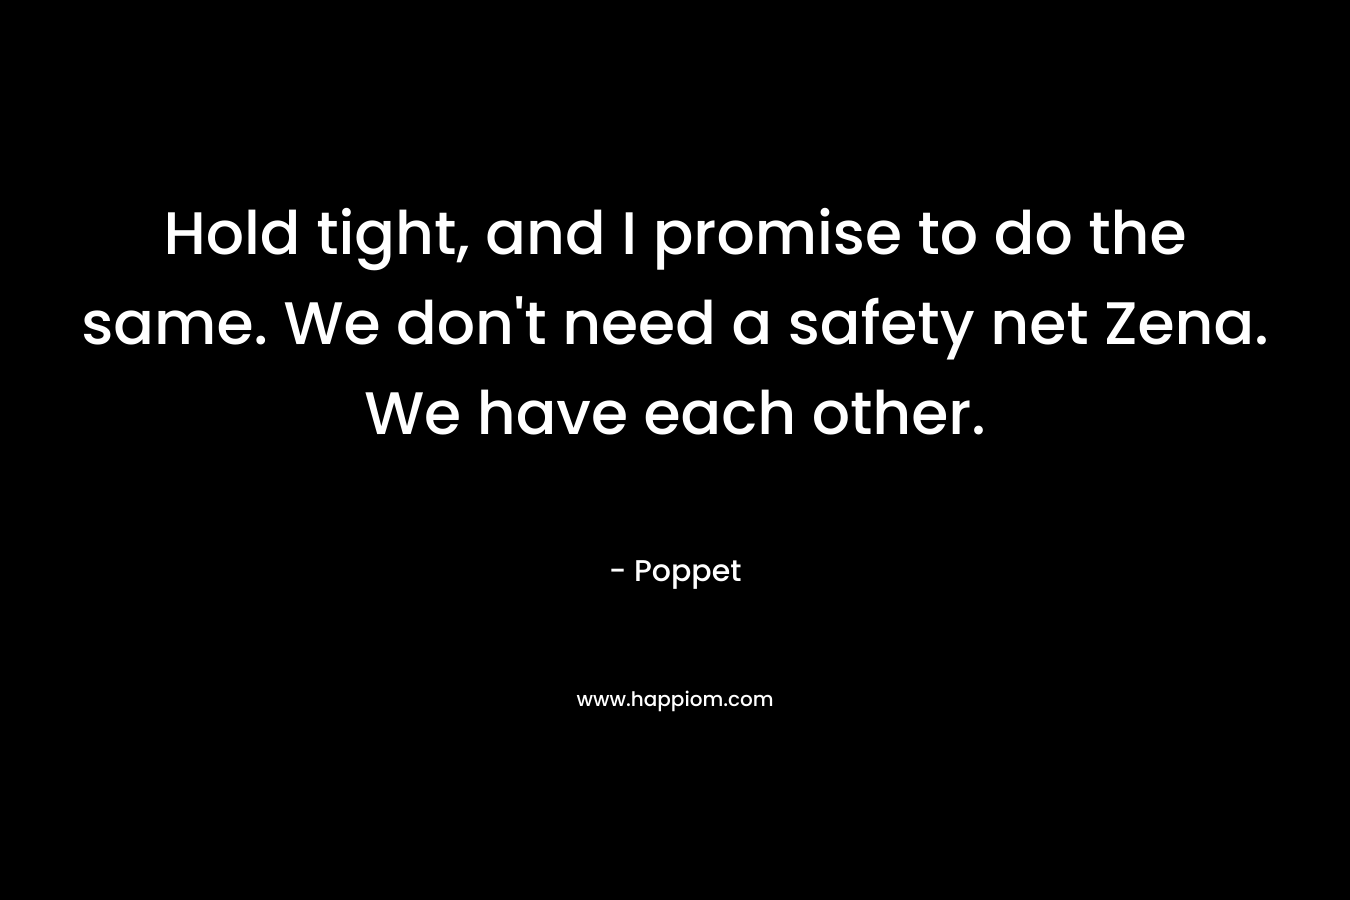 Hold tight, and I promise to do the same. We don't need a safety net Zena. We have each other.